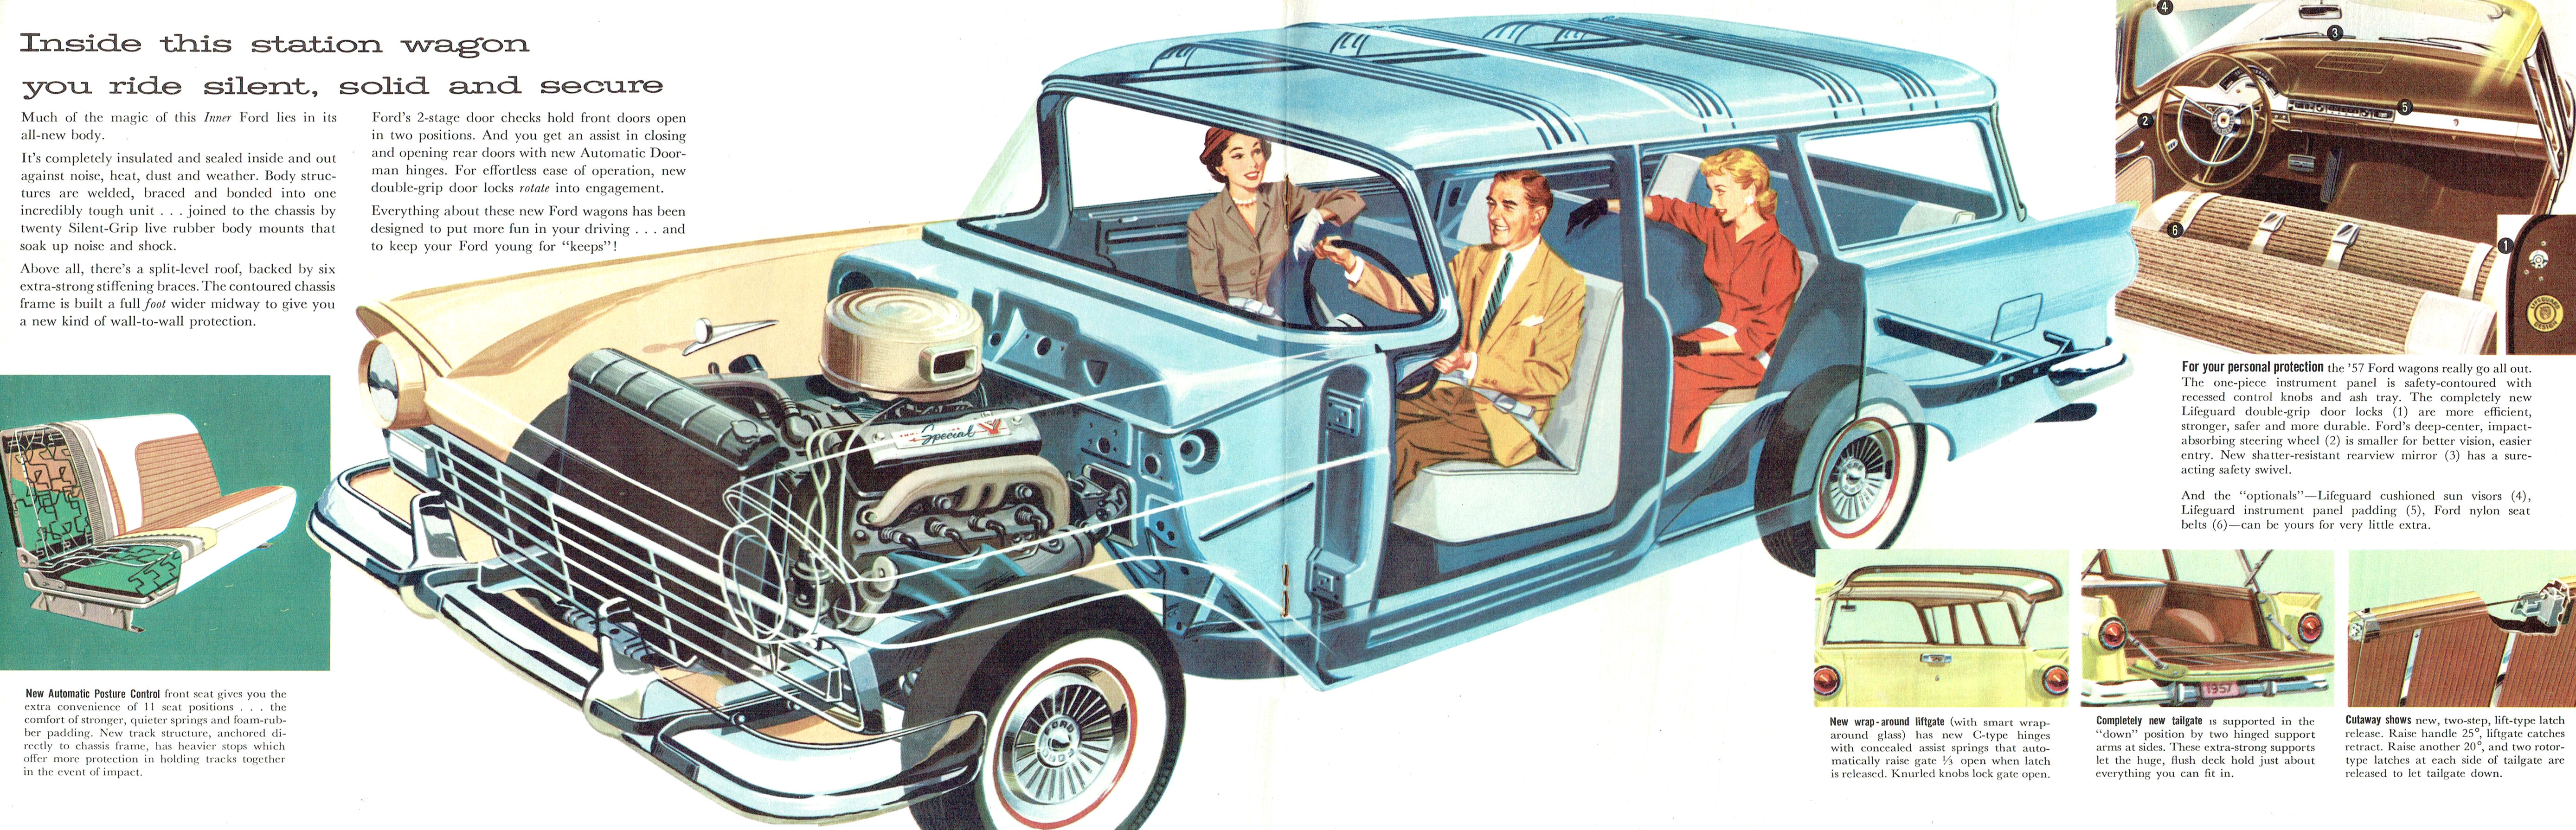 1957_Ford_Station_Wagons-10-11